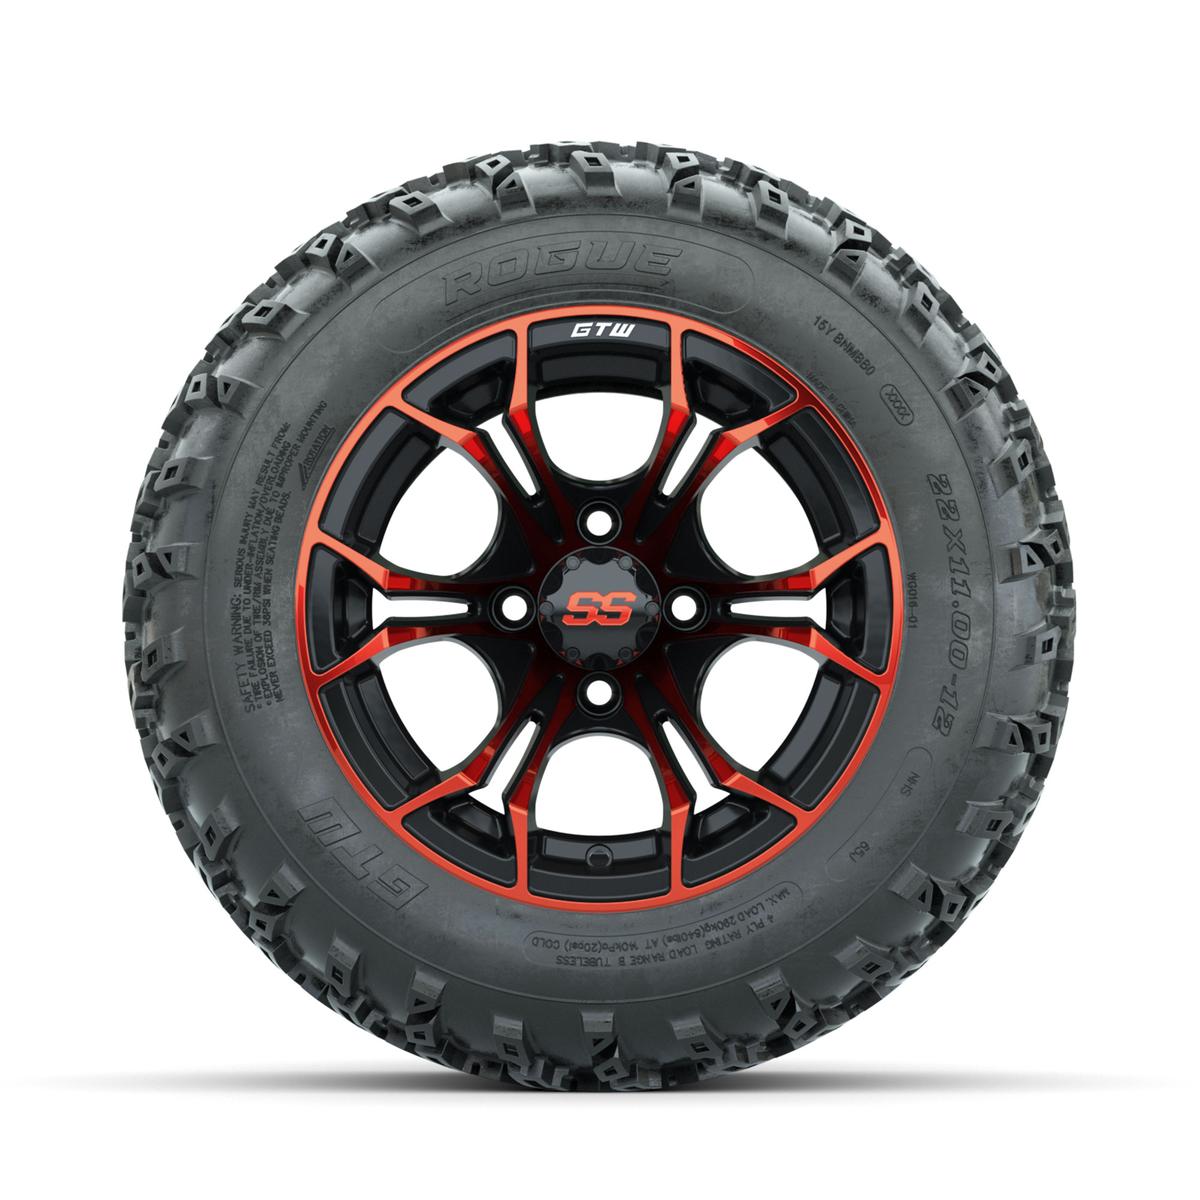 GTW Spyder Red/Black 12 in Wheels with 22x11.00-12 Rogue All Terrain Tires – Full Set